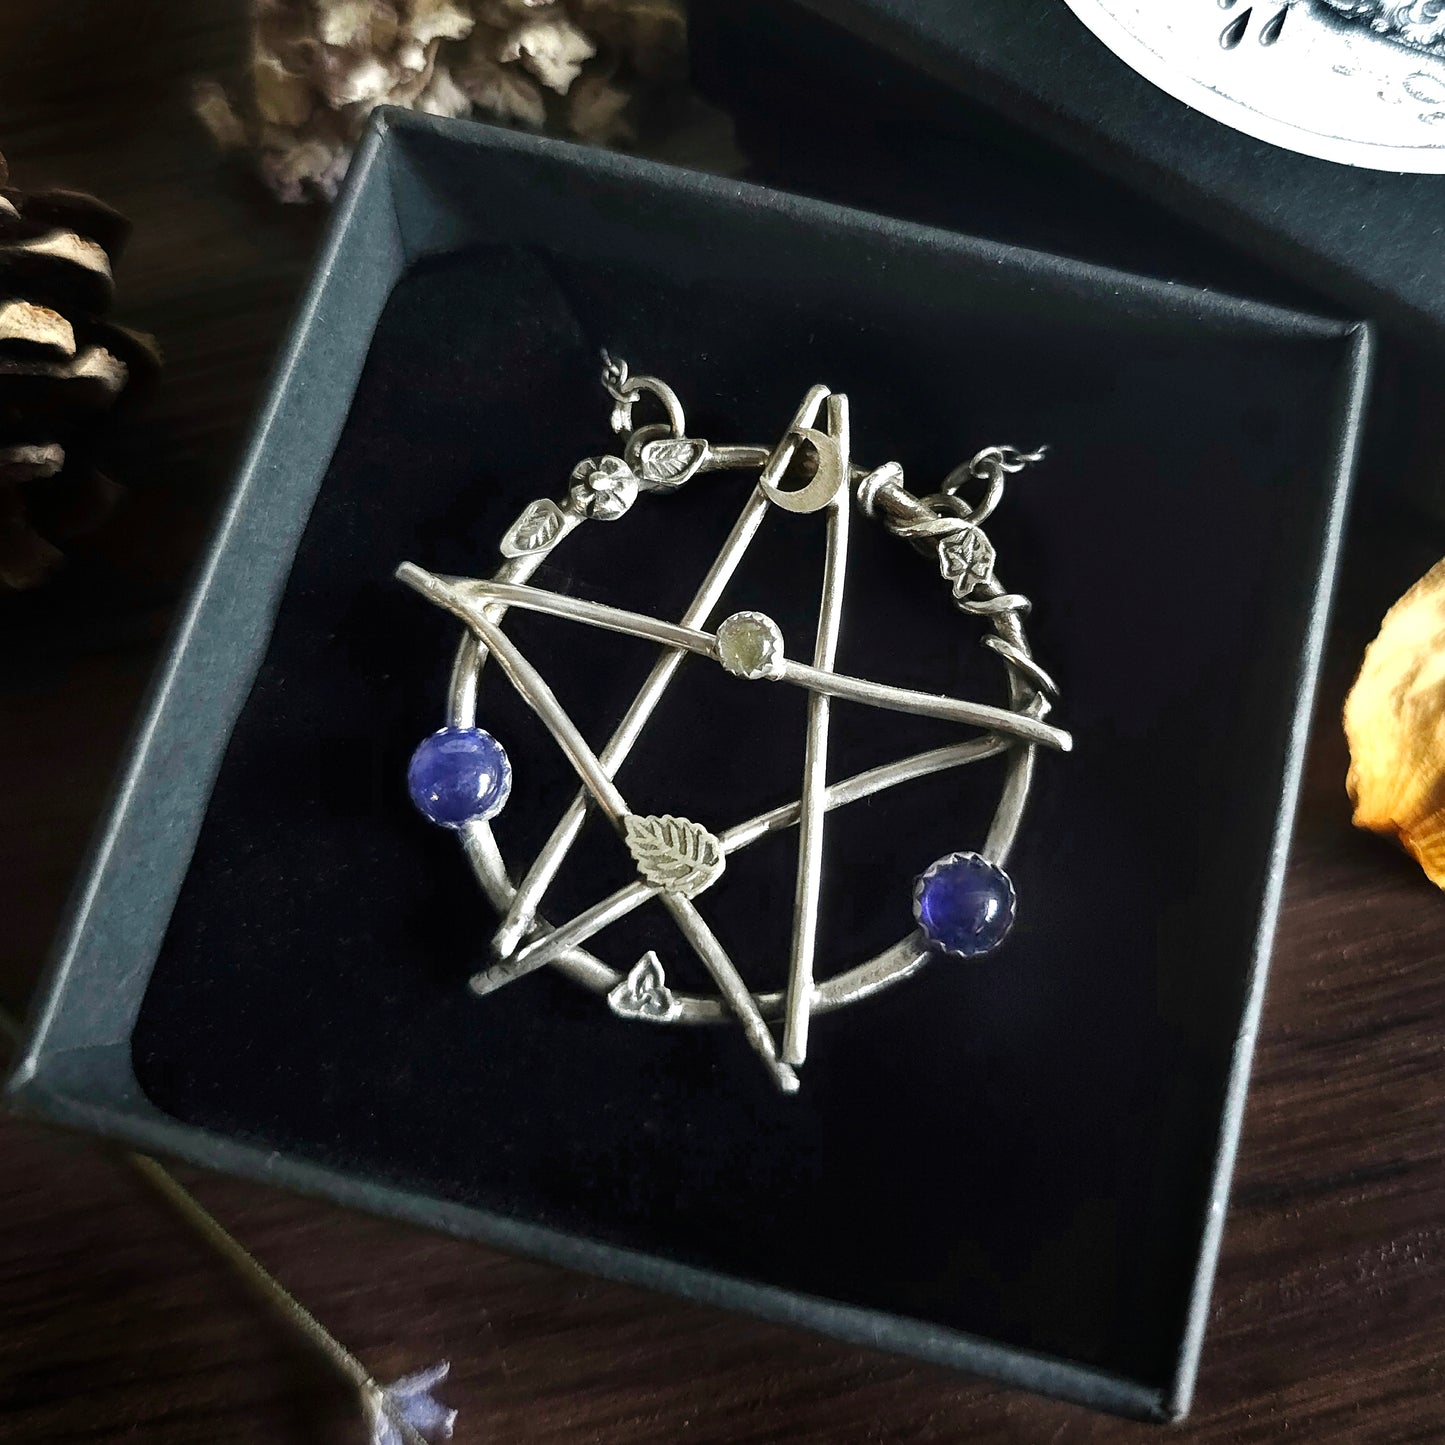 Woods Witch Pentacle 5